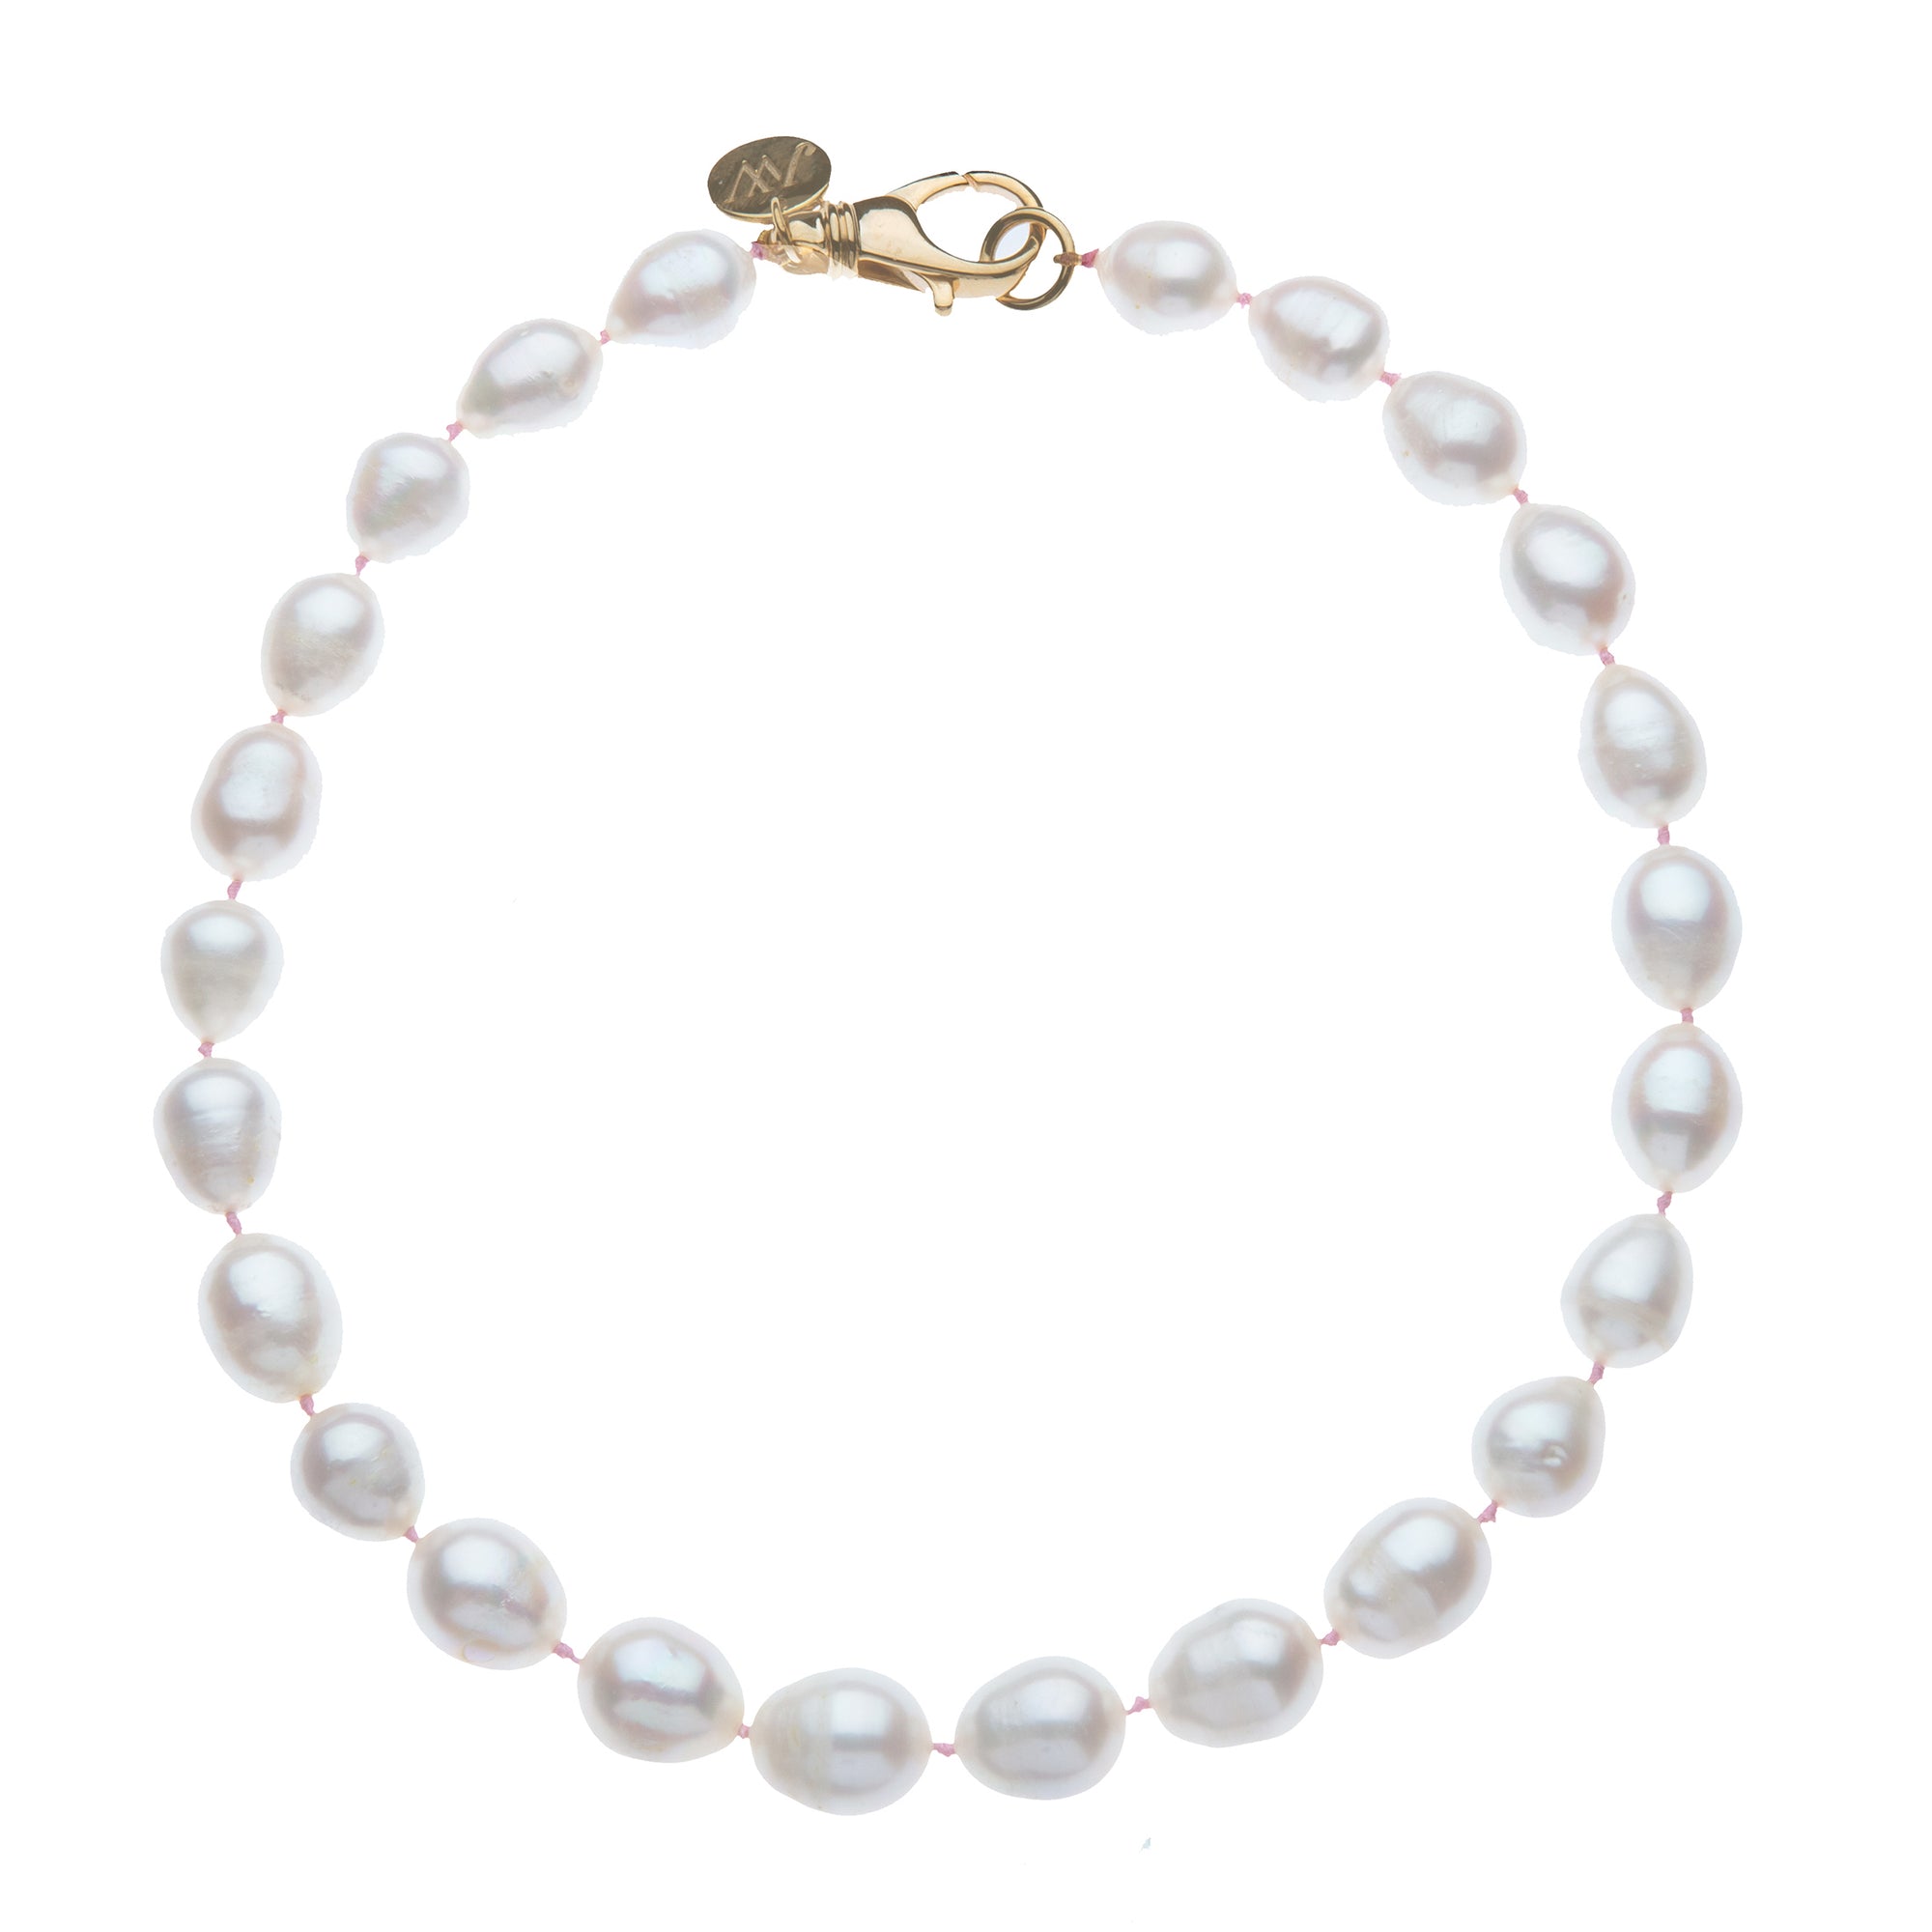 White Pearl Knotted Beaded Necklace